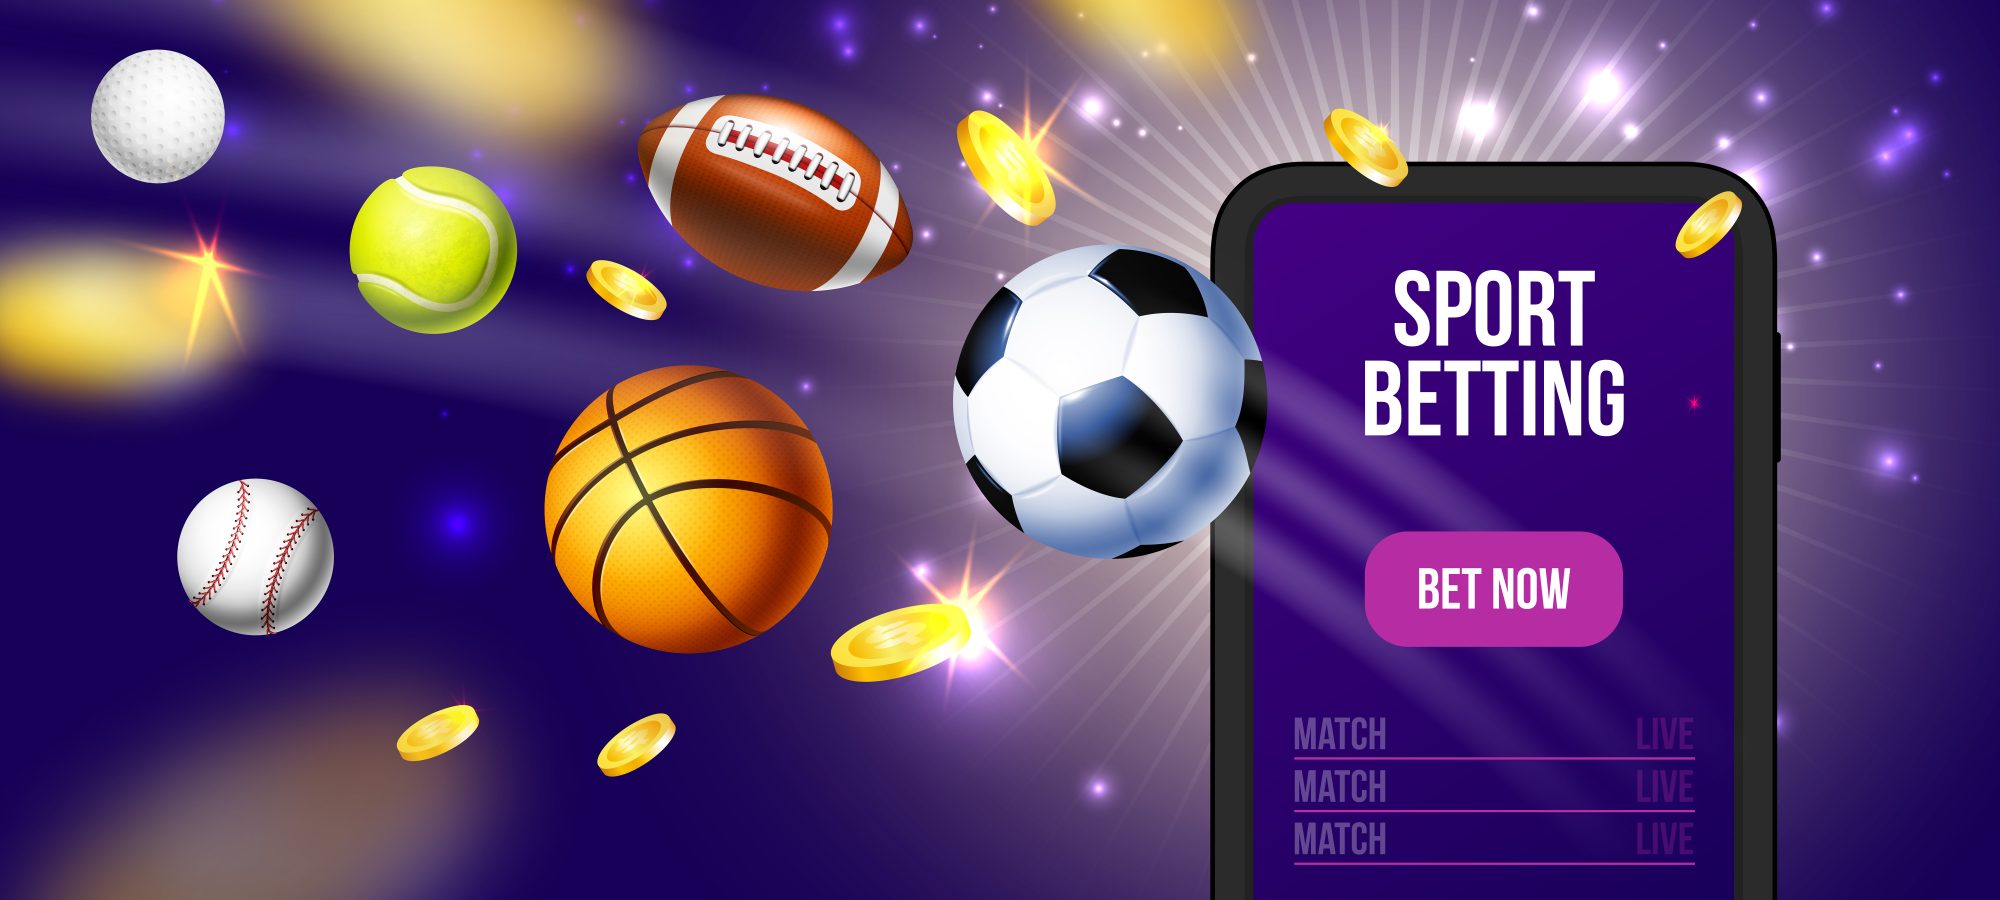 What is the Best Betting App?